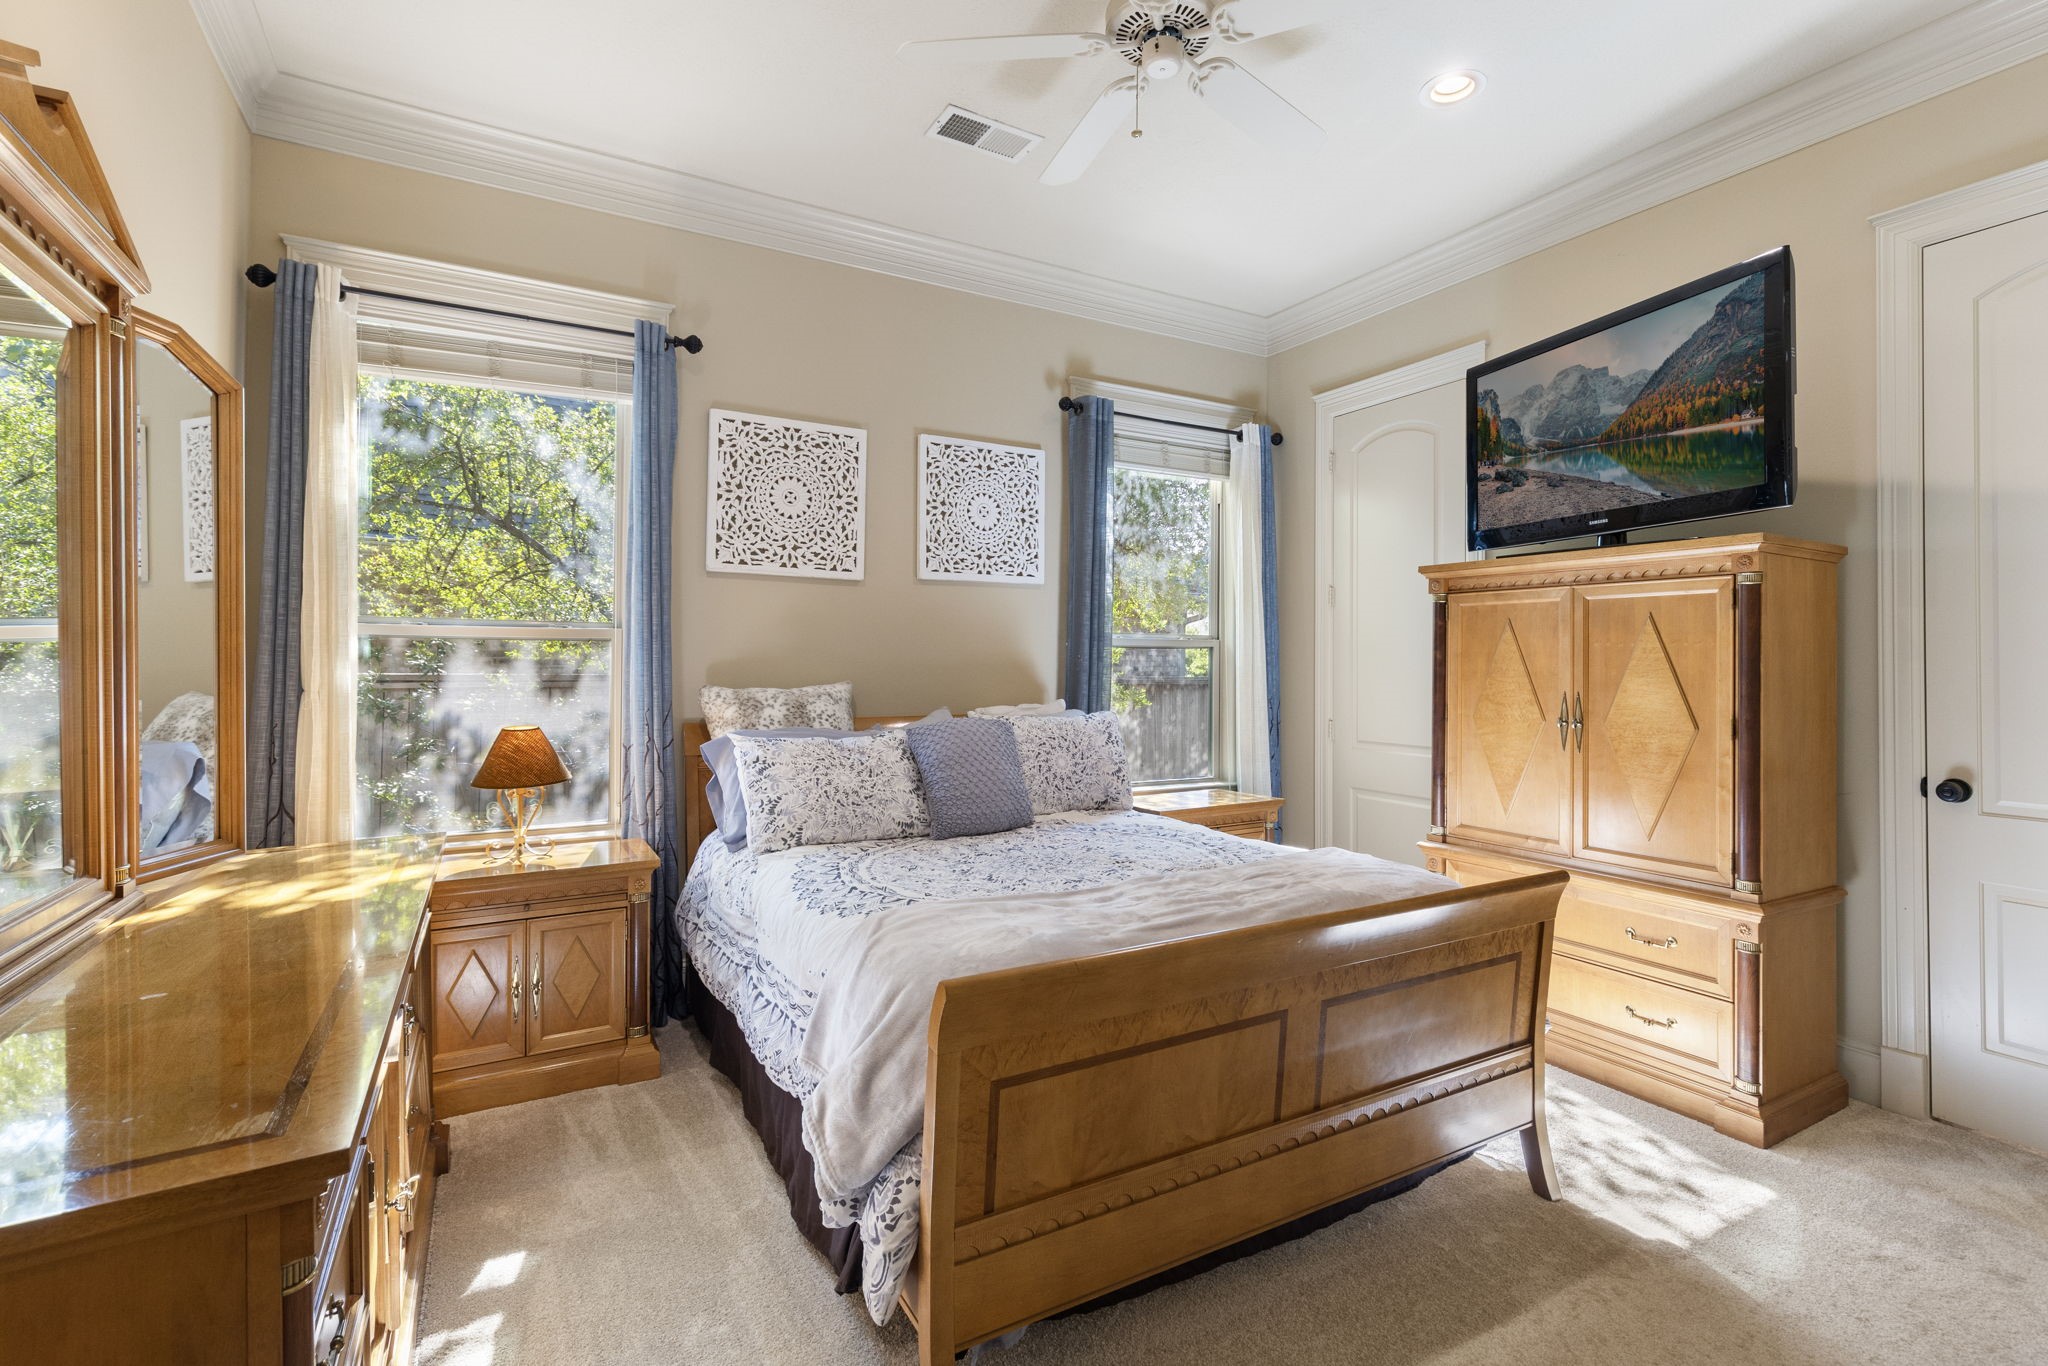 This Secondary bedroom is located downstairs off of the family room allowing for privacy for guests.   With new carpet, crown moulding, neutral paint, a sizable walk-in closet and access to full en-suite bathroom.  This space is also an option for multi-generational living.